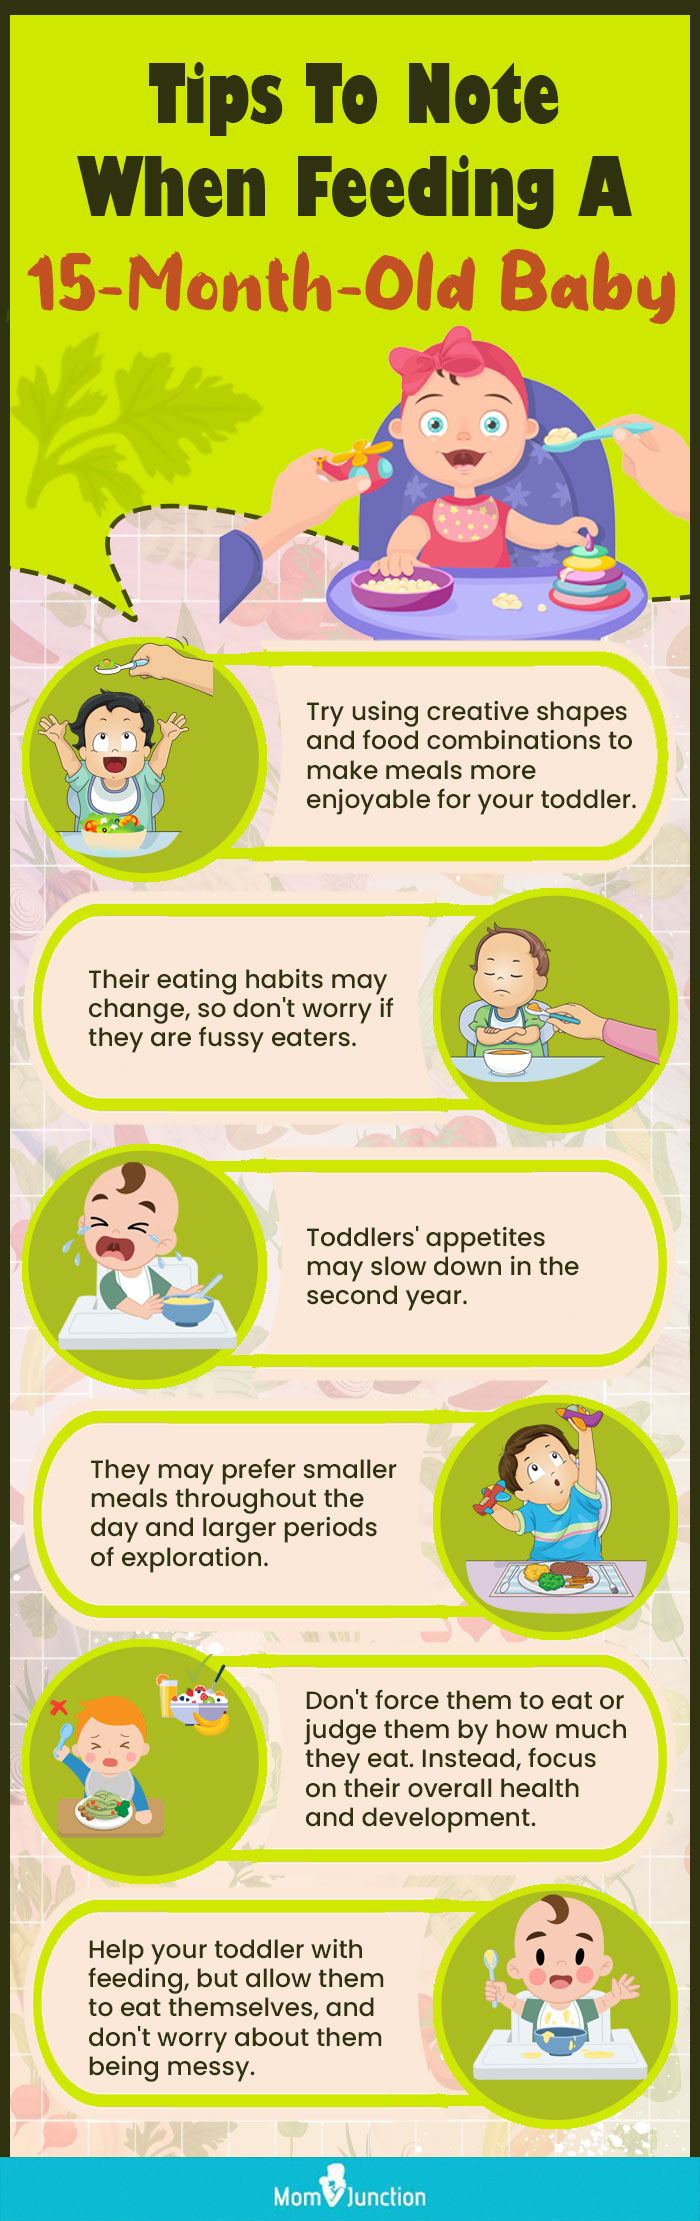 13 - 18 month old baby feeding schedule: How much should a 13 - 18 month  old eat?